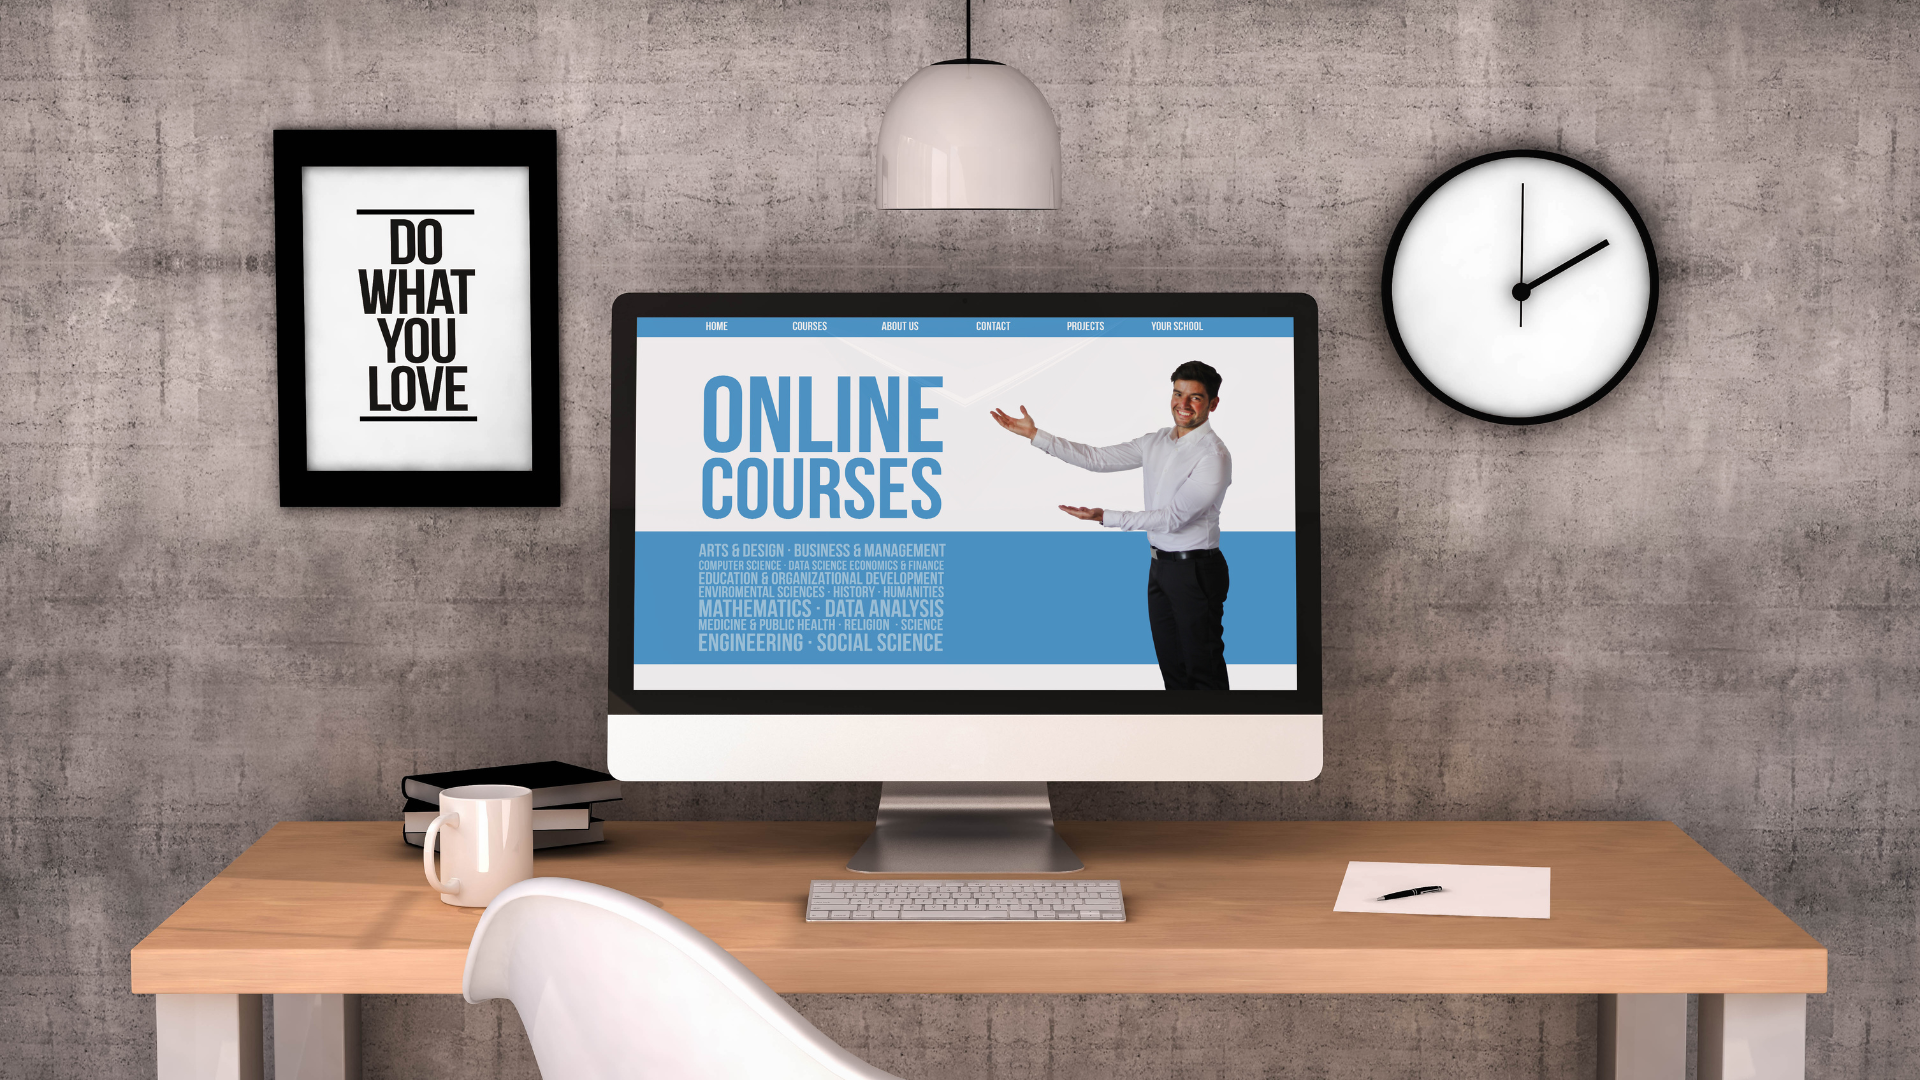 Important Things to Know Before Taking an Online Course